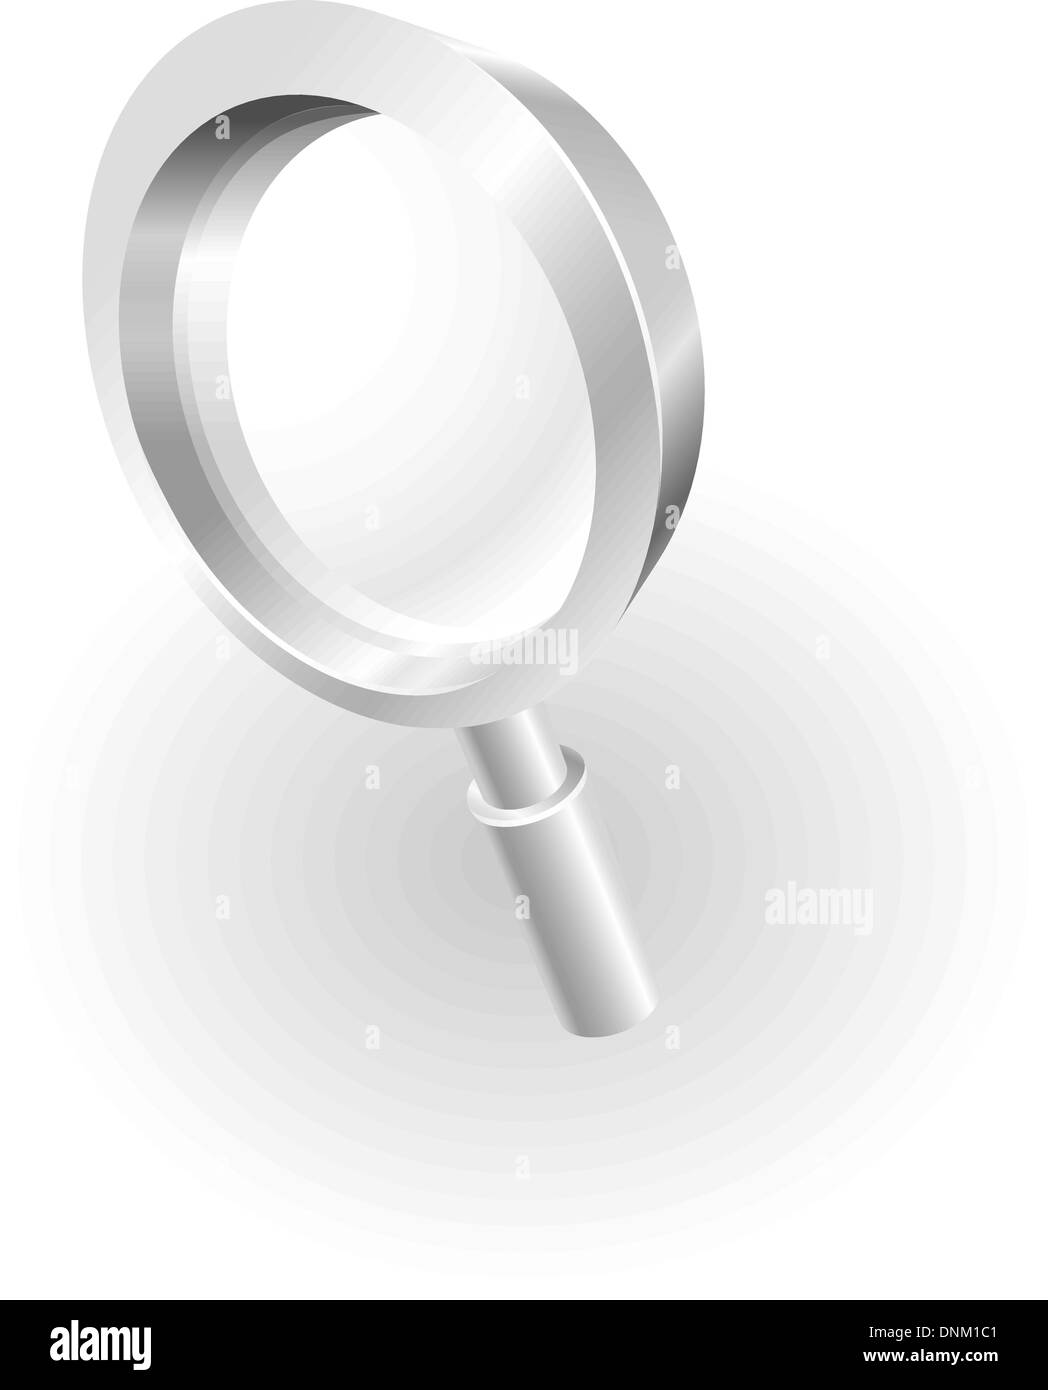 Illustration of a silver metallic magnifying glass Stock Vector